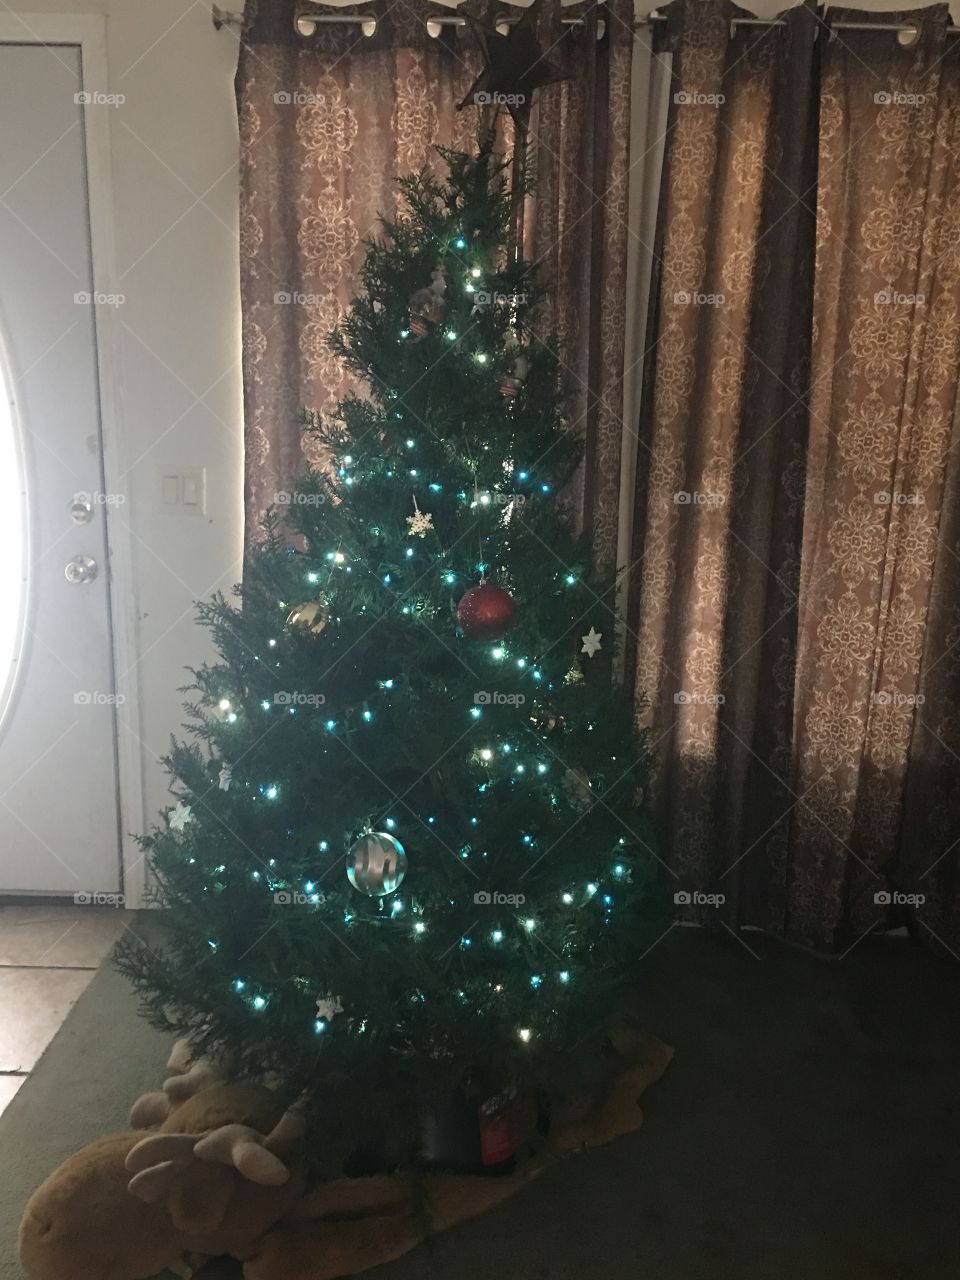 Got the tree home and decorated!